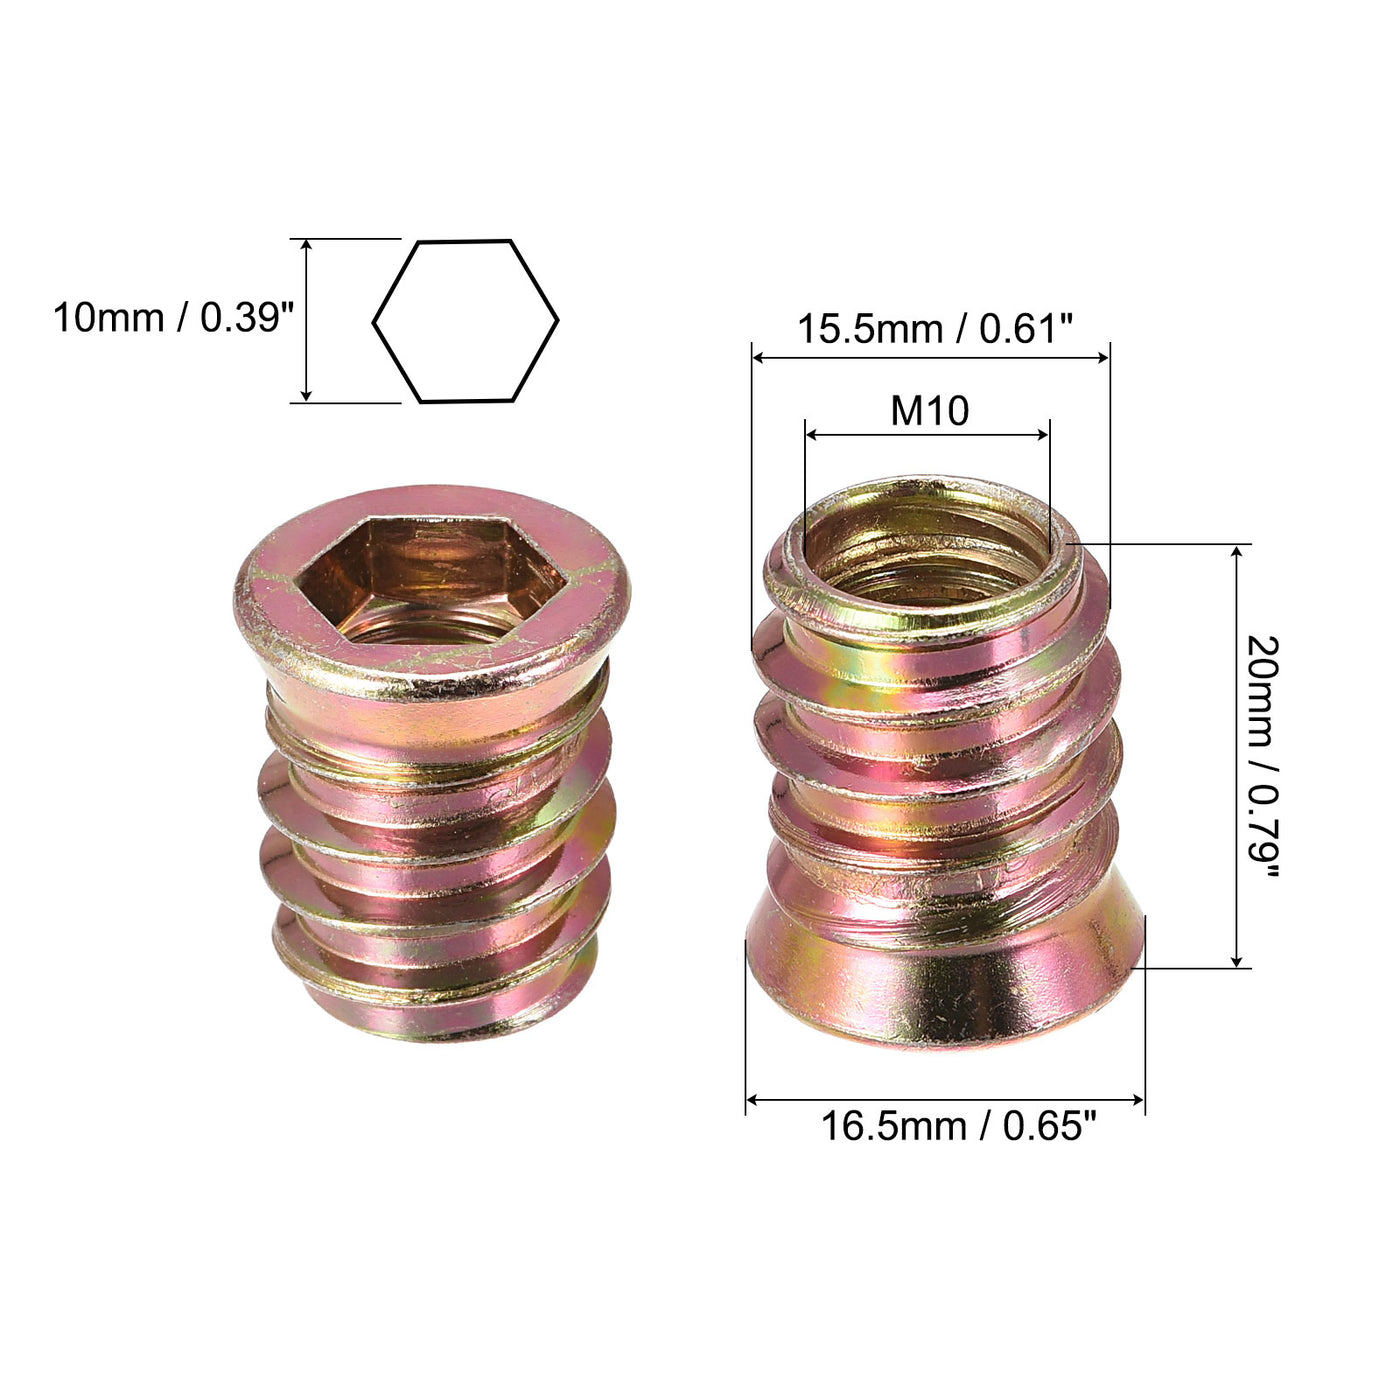 uxcell Uxcell M10x20mm Threaded Inserts for Wood Hex Socket Drive Furniture Screw-in Nut 64pcs